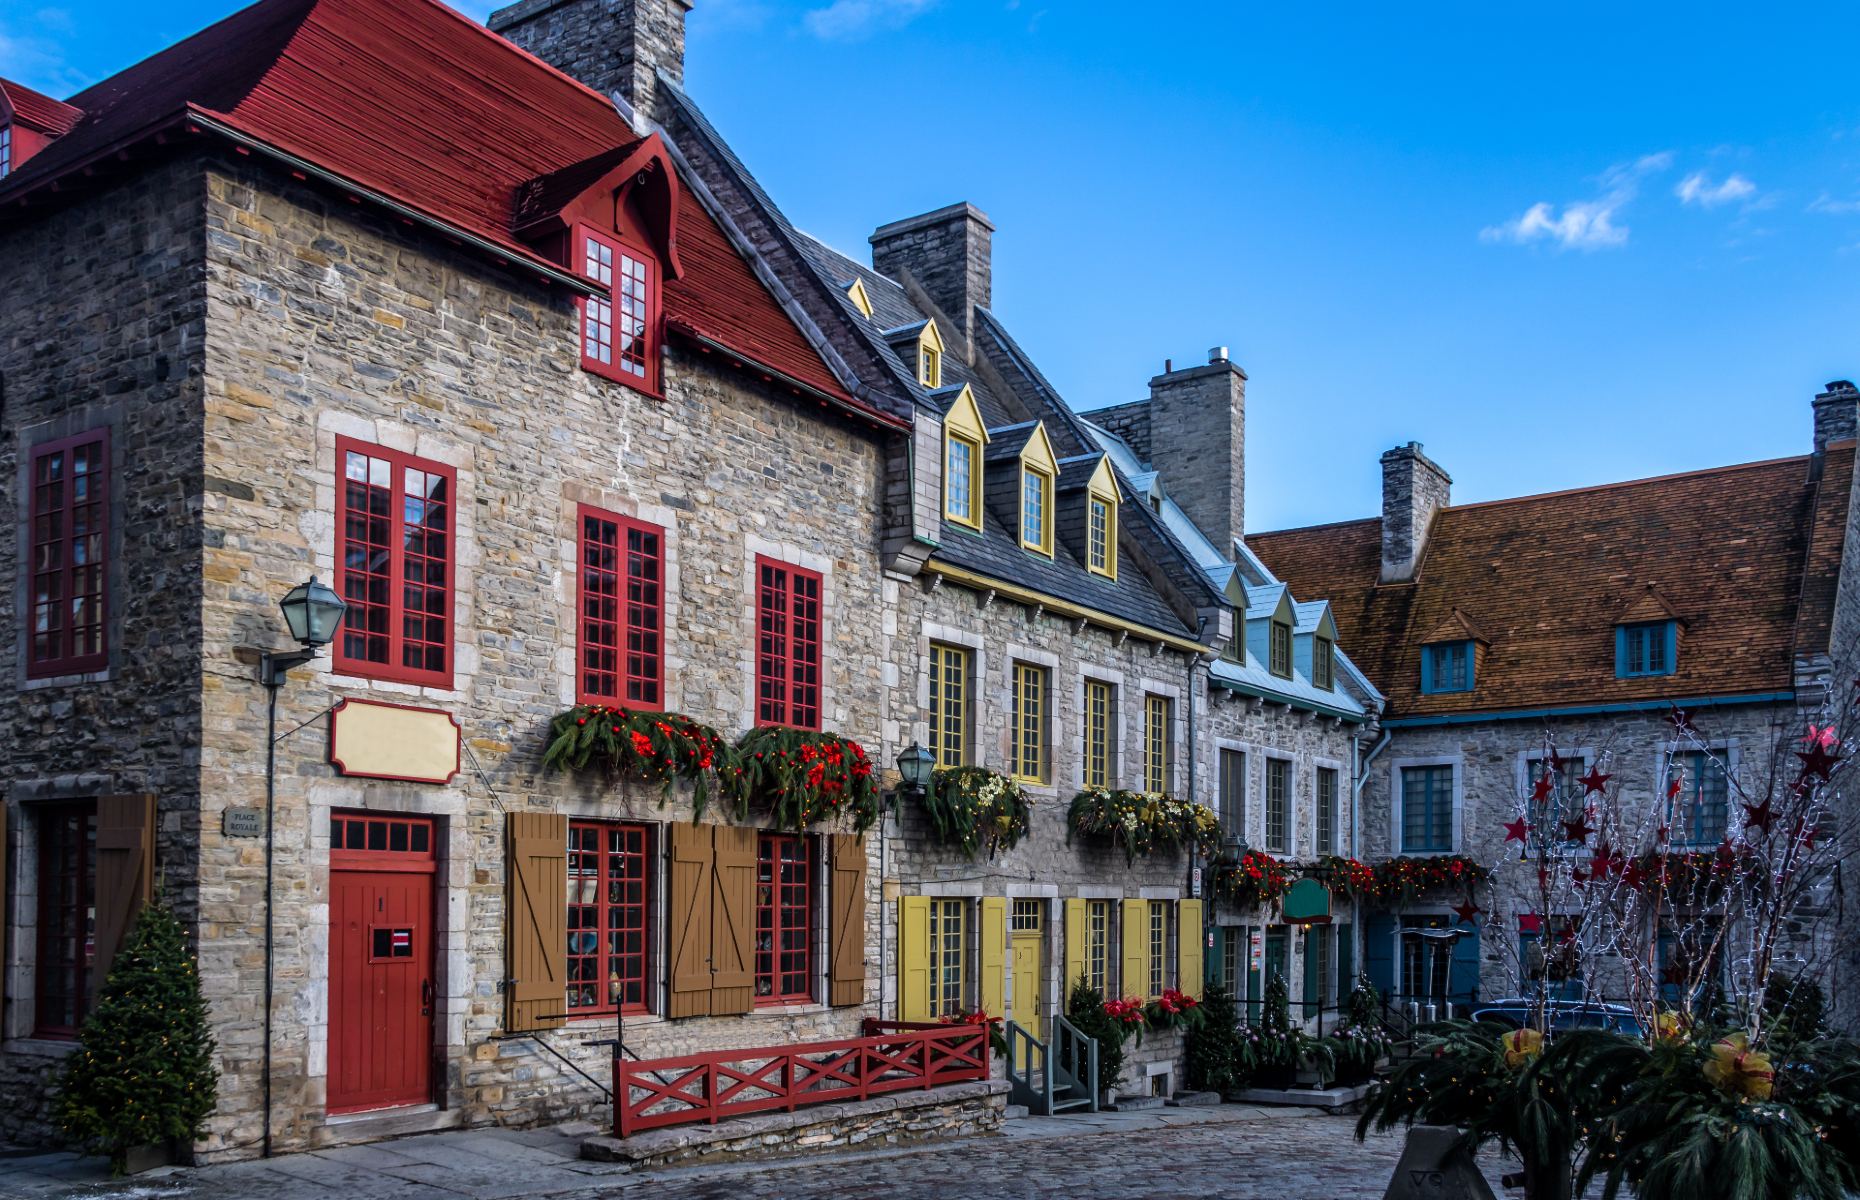 Royal Plaza buildings in Old Quebec (Image: Diego Grandi/Shutterstock)